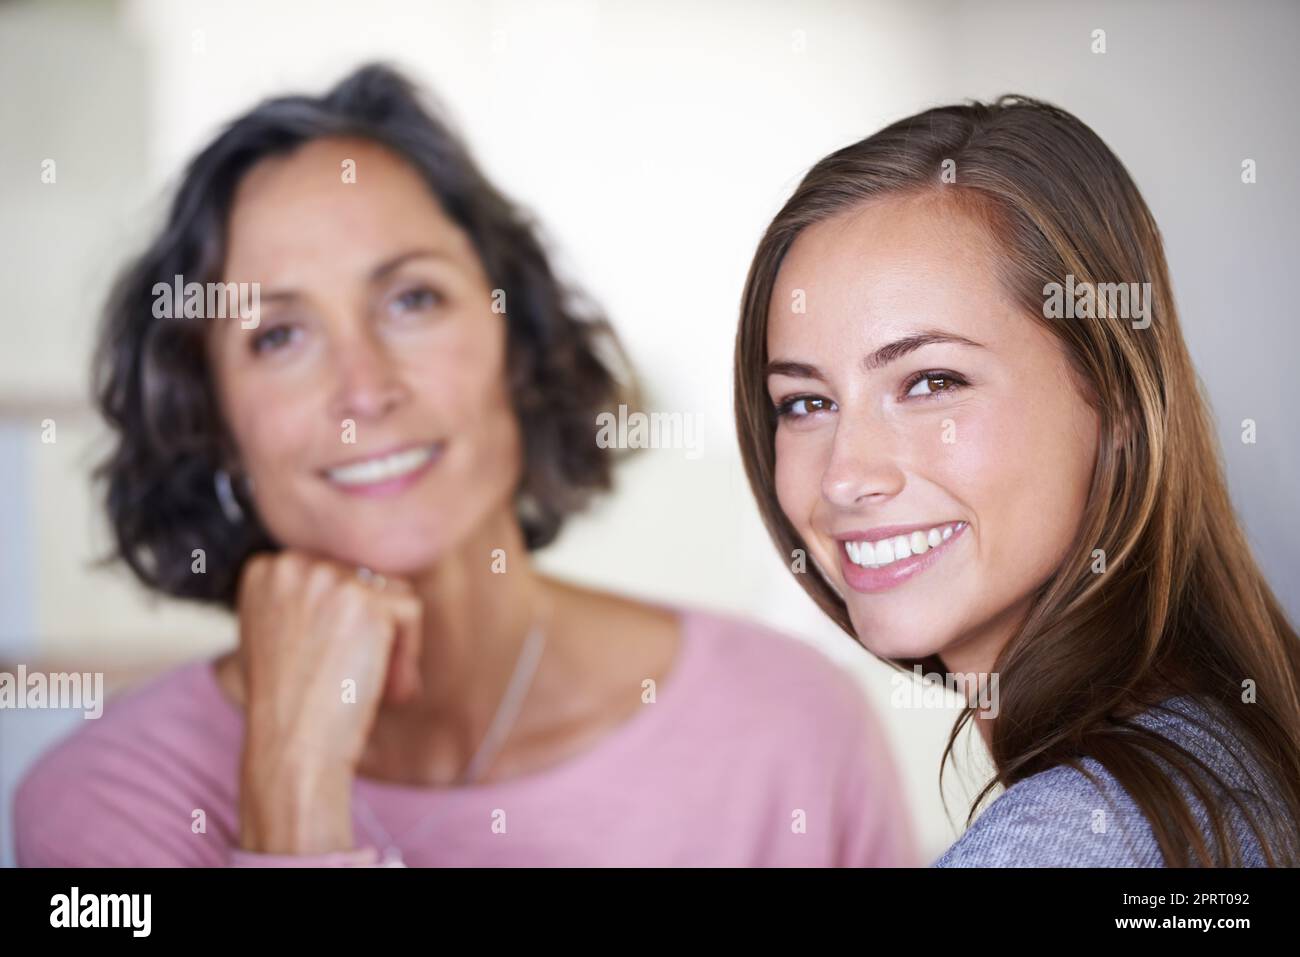 Her mom will always be her best friend. A mother and daughter smiling happily while they spend time indoors. Stock Photo